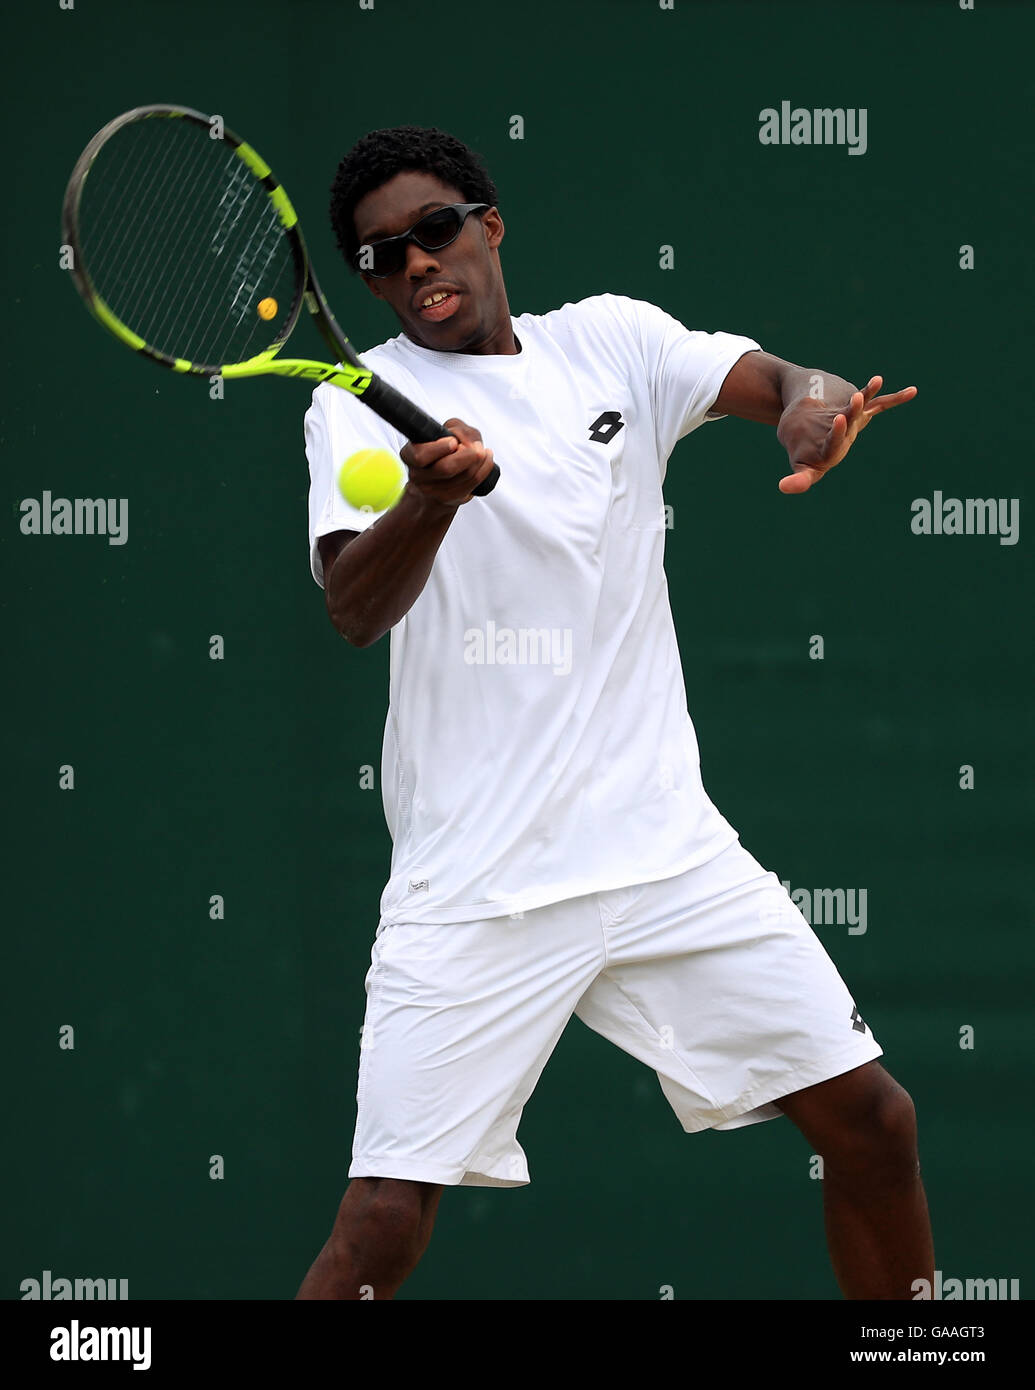 Olukayode Alafia Damina Ayeni in action in the boys singles on day seven of the Wimbledon Championships at the All England Lawn Tennis and Croquet Club, Wimbledon. PRESS ASSOCIATION Photo. Picture date: Monday July 4, 2016. See PA story TENNIS Wimbledon. Photo credit should read: Adam Davy/PA Wire. RESTRICTIONS: Editorial use only. No commercial use without prior written consent of the AELTC. Still image use only - no moving images to emulate broadcast. No superimposing or removal of sponsor/ad logos. Call +44 (0)1158 447447 for further information. Stock Photo